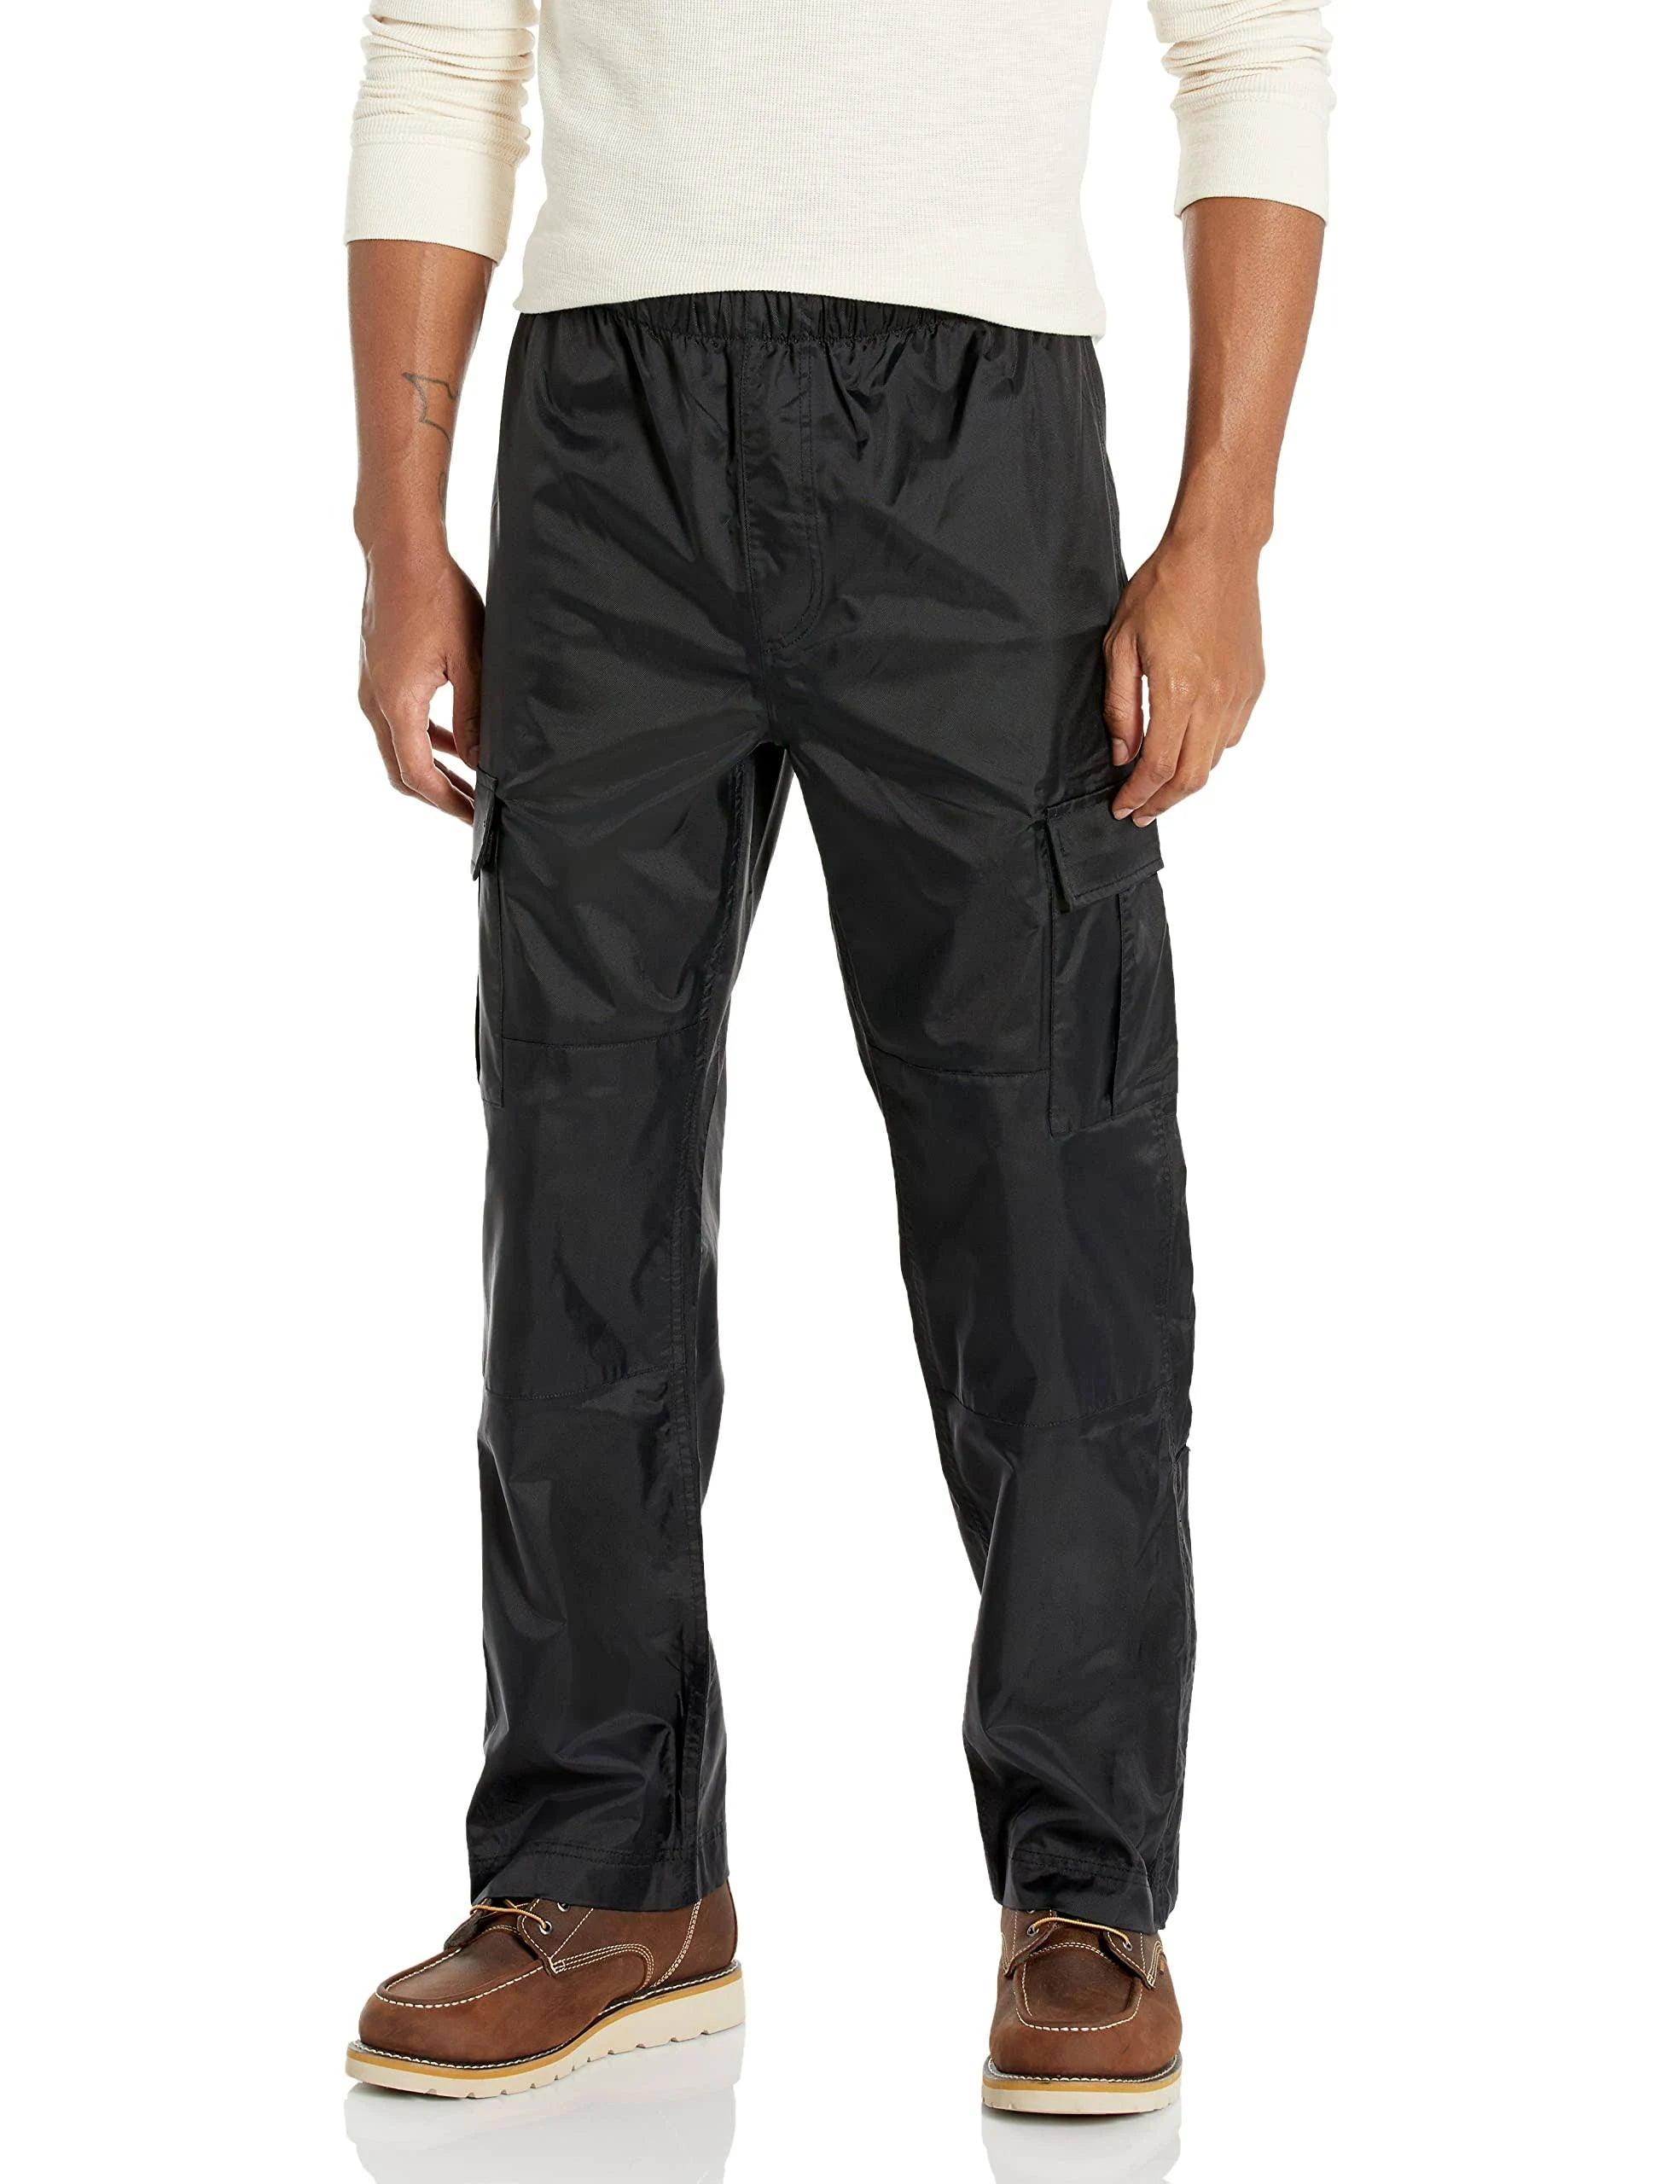 103507 - Dry Harbor Pant - Black - Purpose-Built / Home of the Trades